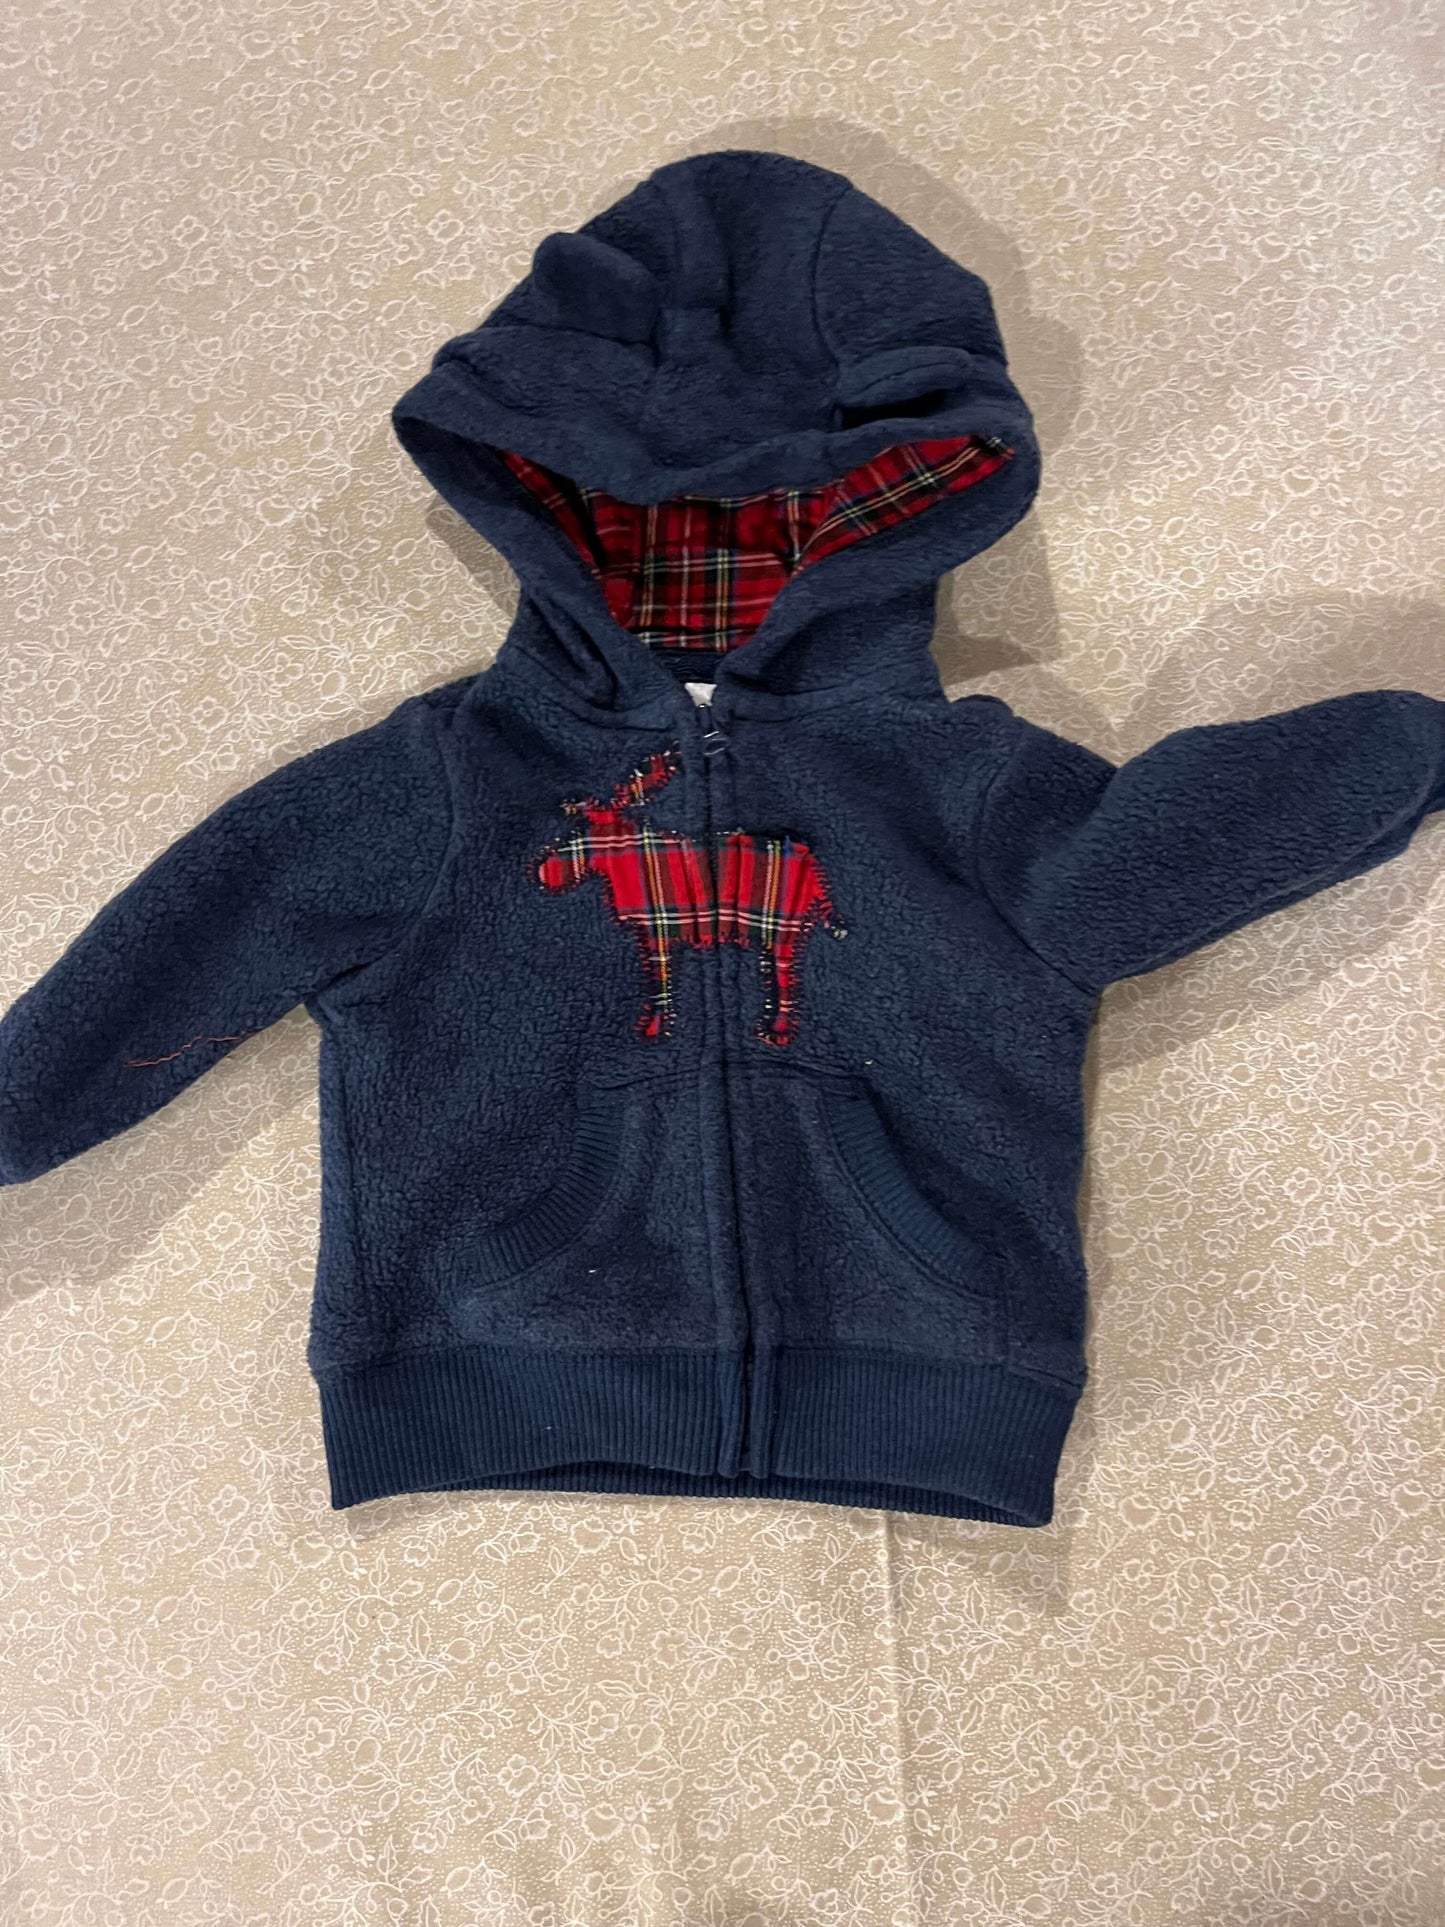 3-month-shirt-carters-sweater-blue-w-moose